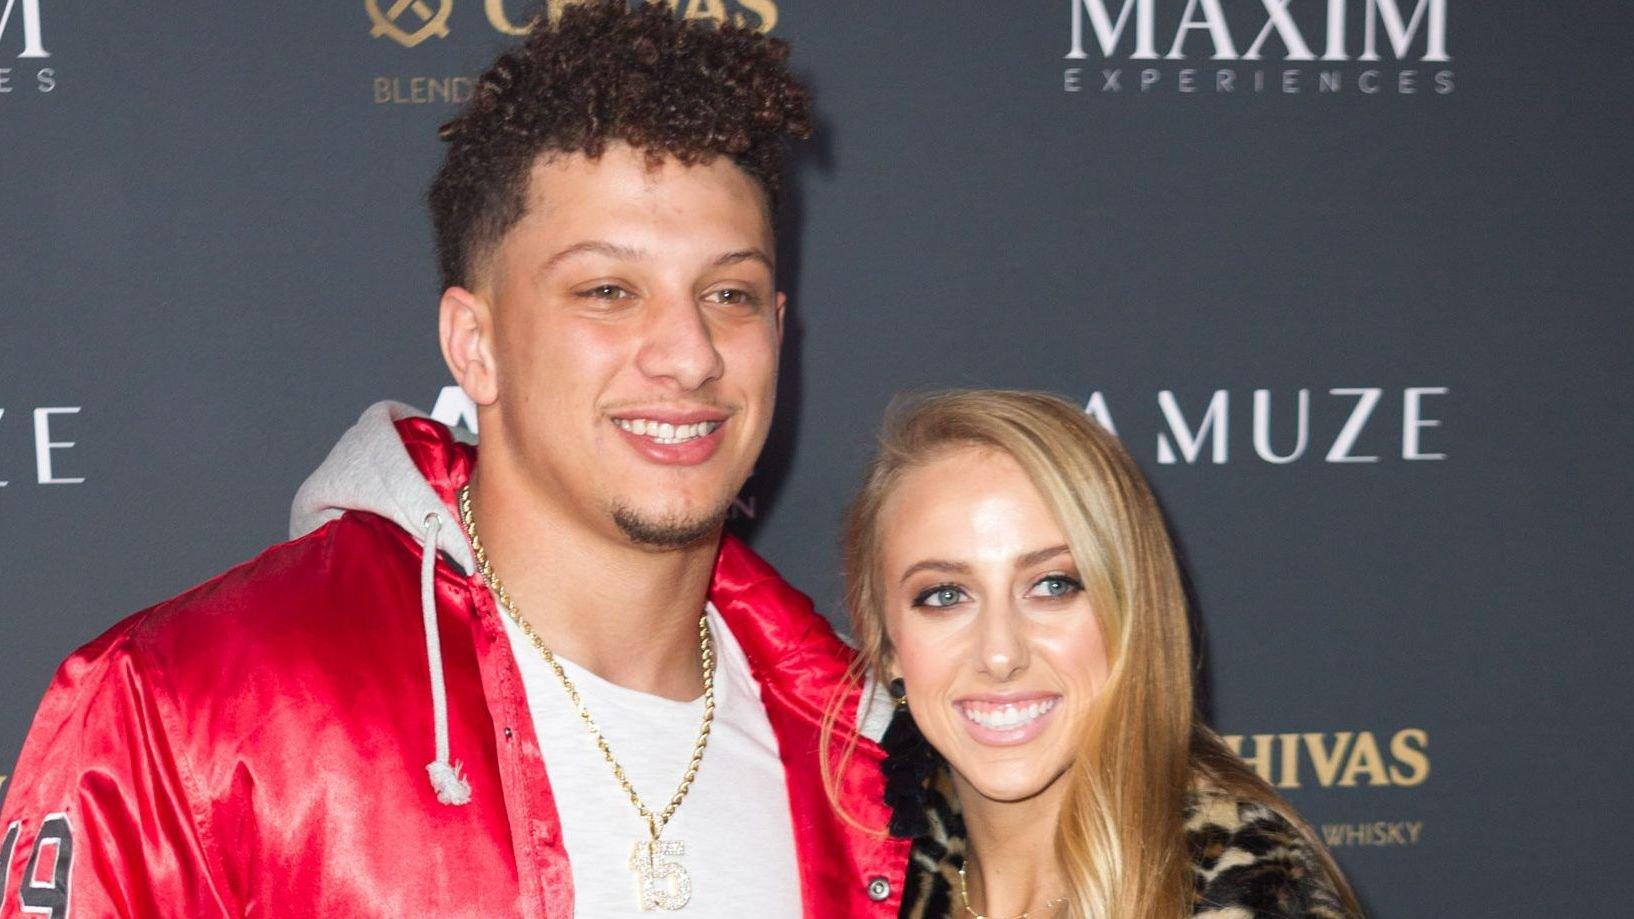 Patrick Mahomes and his wife Brittany Matthews